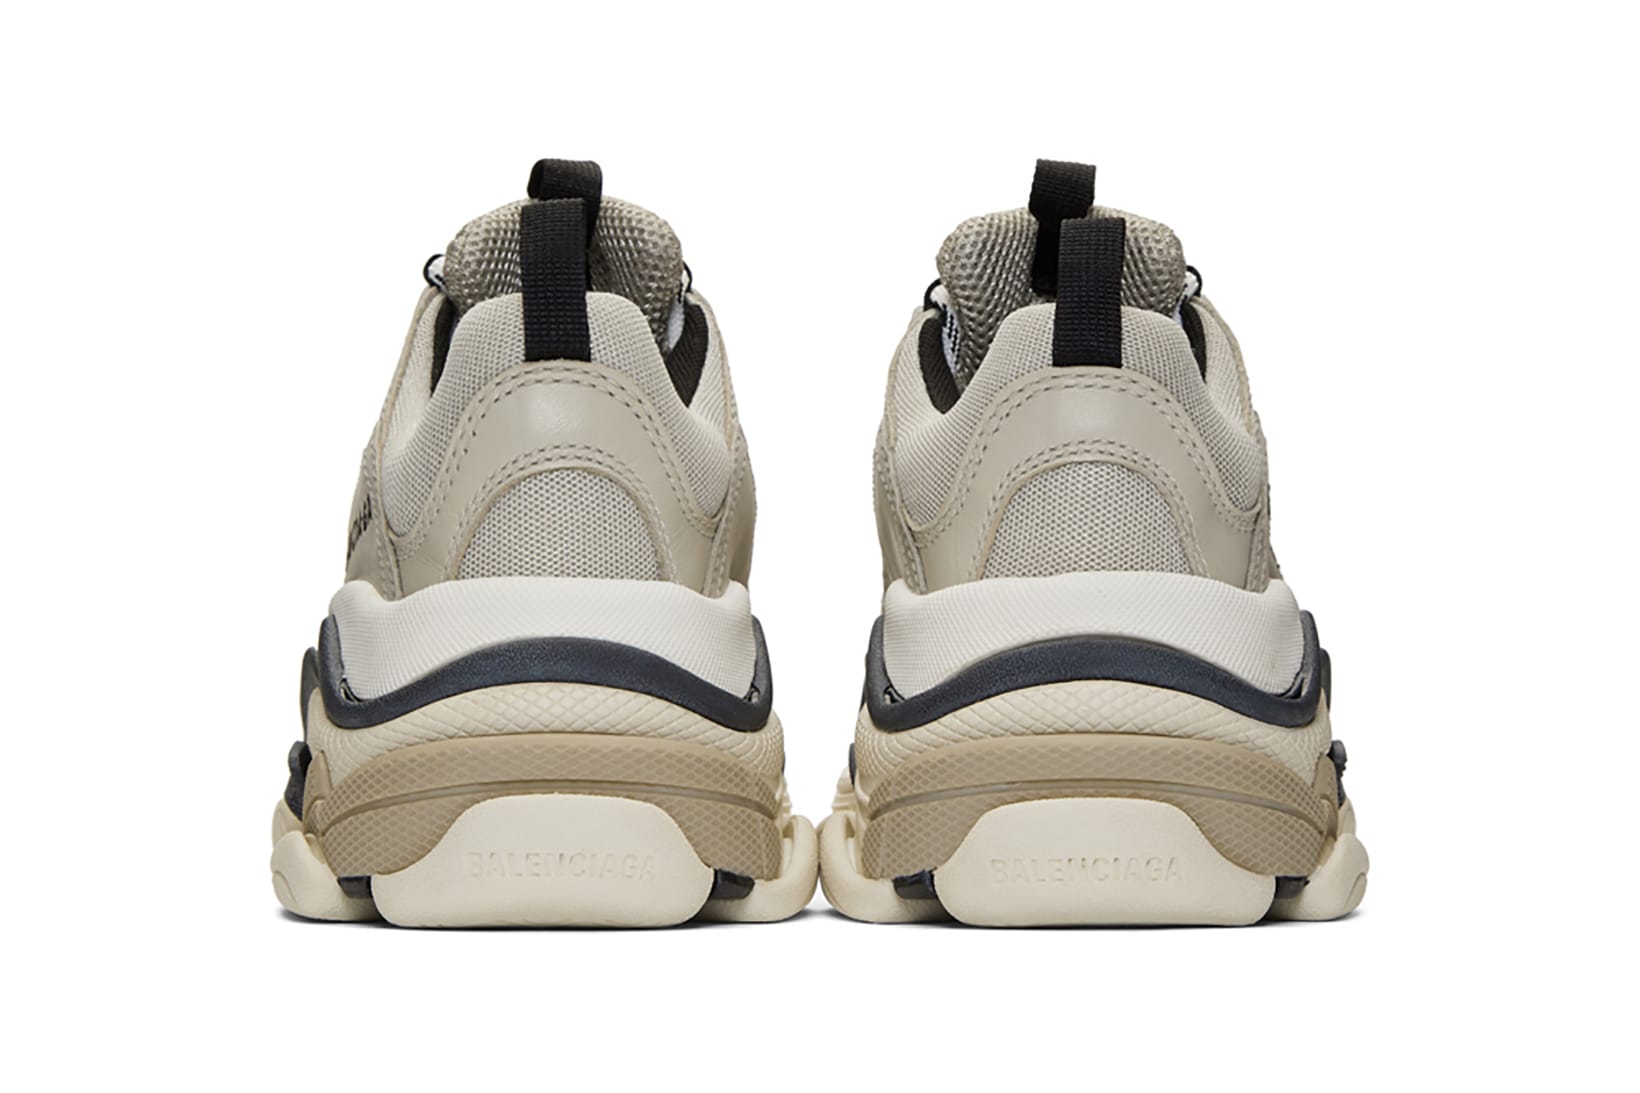 BALENCiAGA white Triple S clear sole sneakers Wessyshop